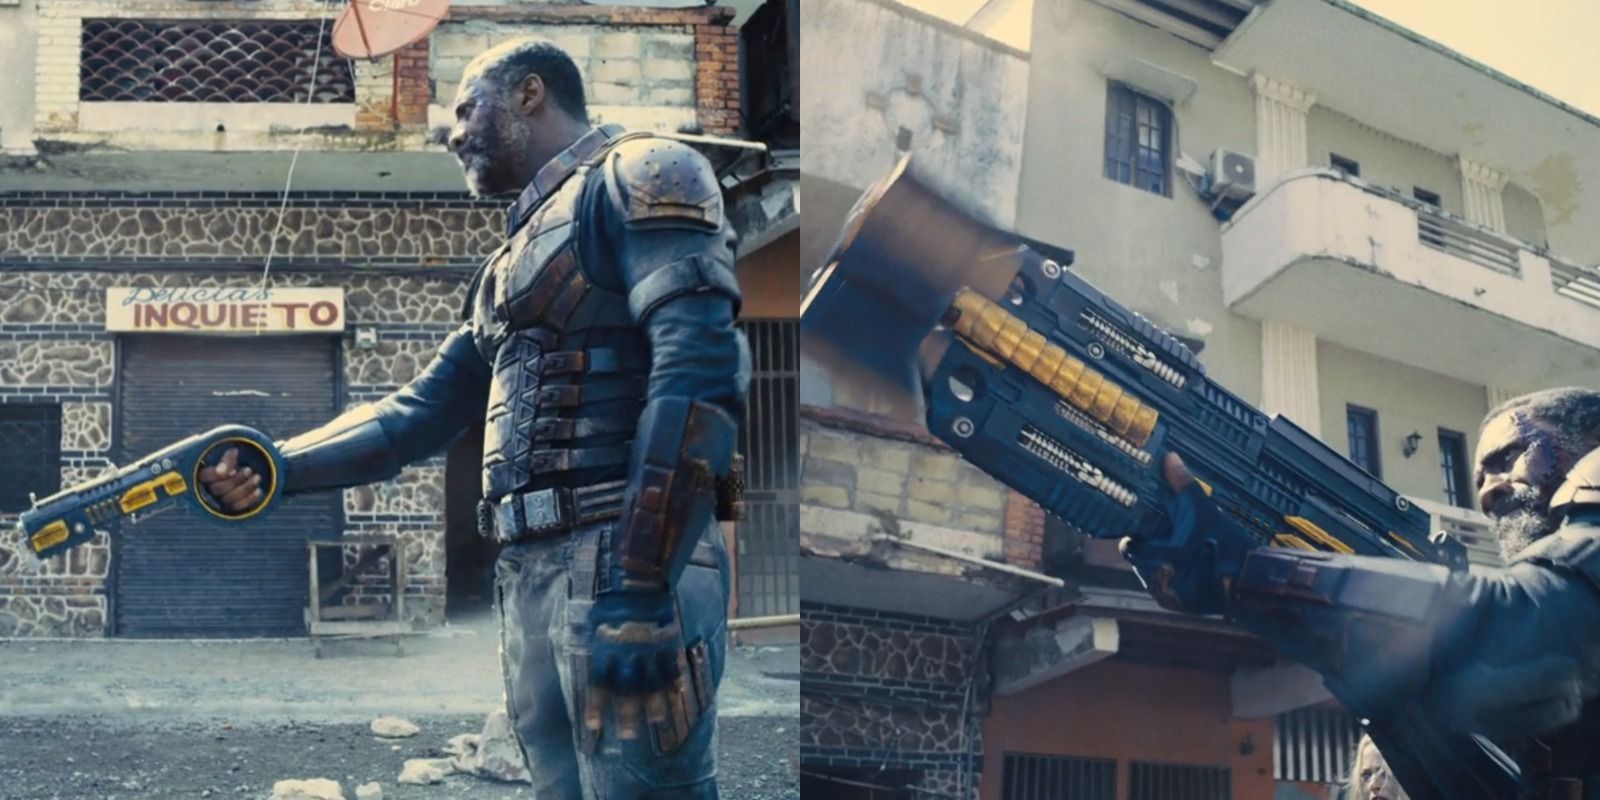 Side-by-side view of Bloodsport wielding his transforming guns in James Gunn's The Suicide Squad